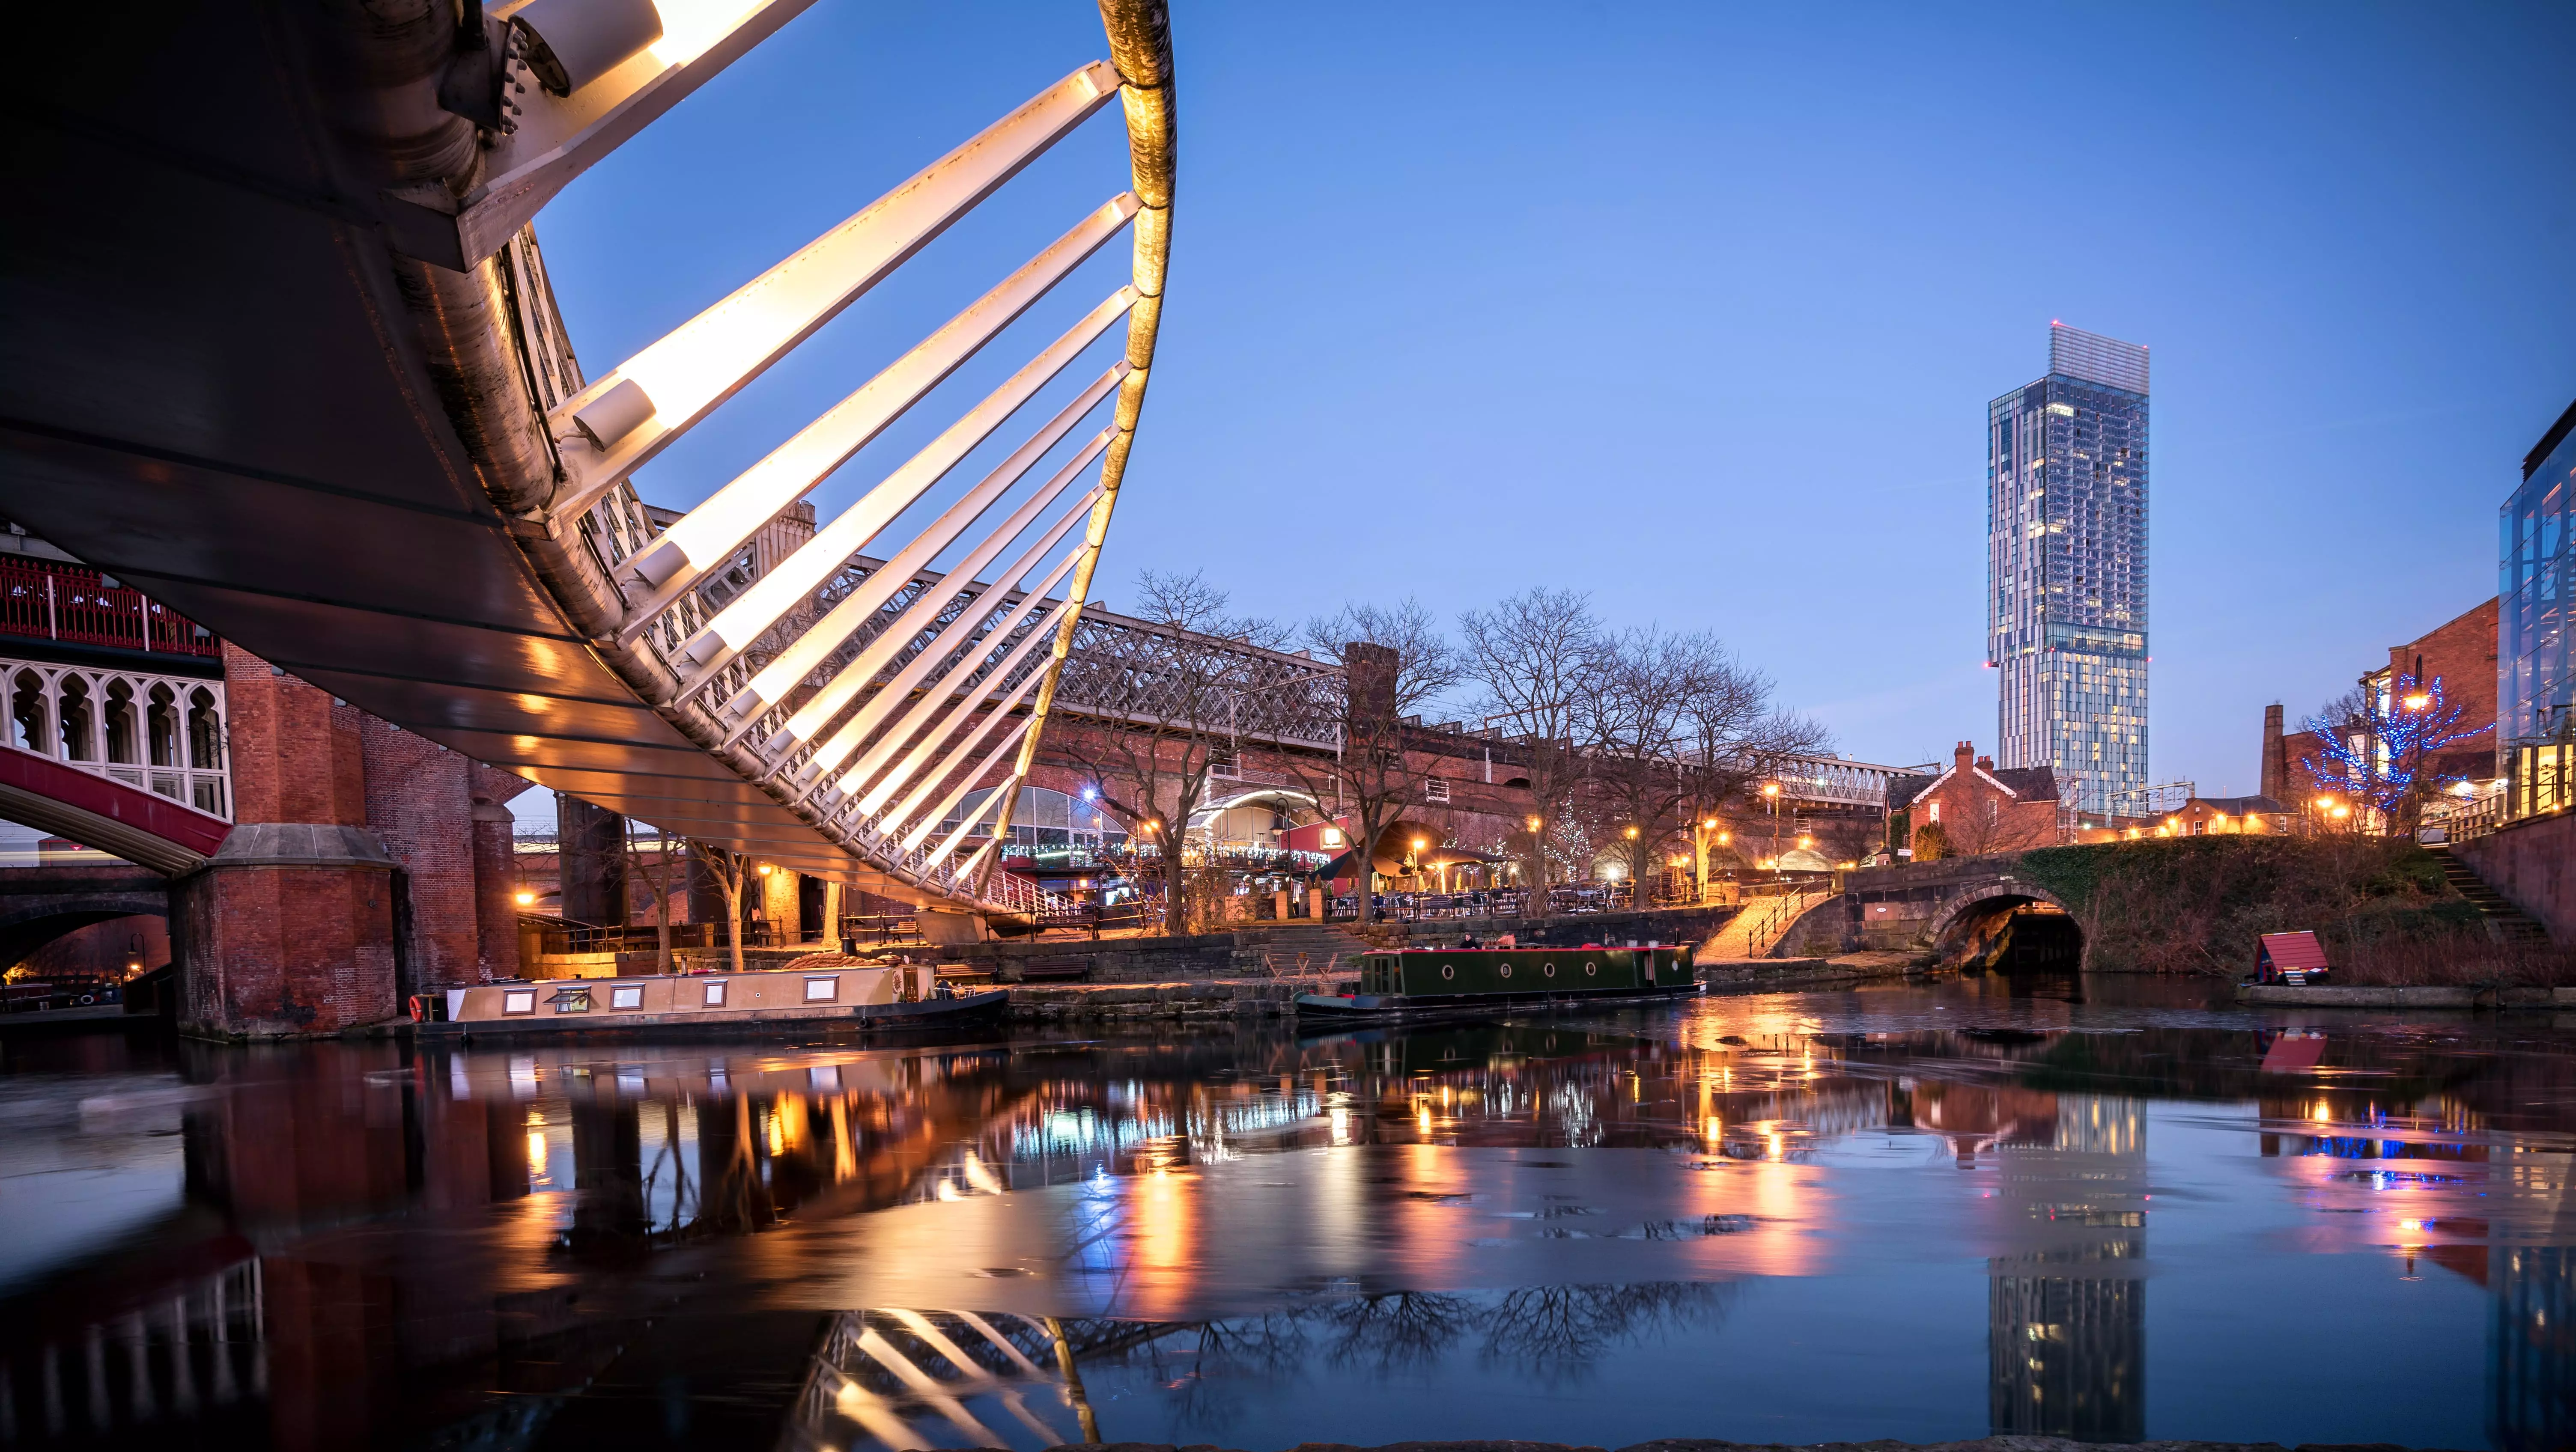 Castlefield, the River Irwell, Quay Street, Deansgate